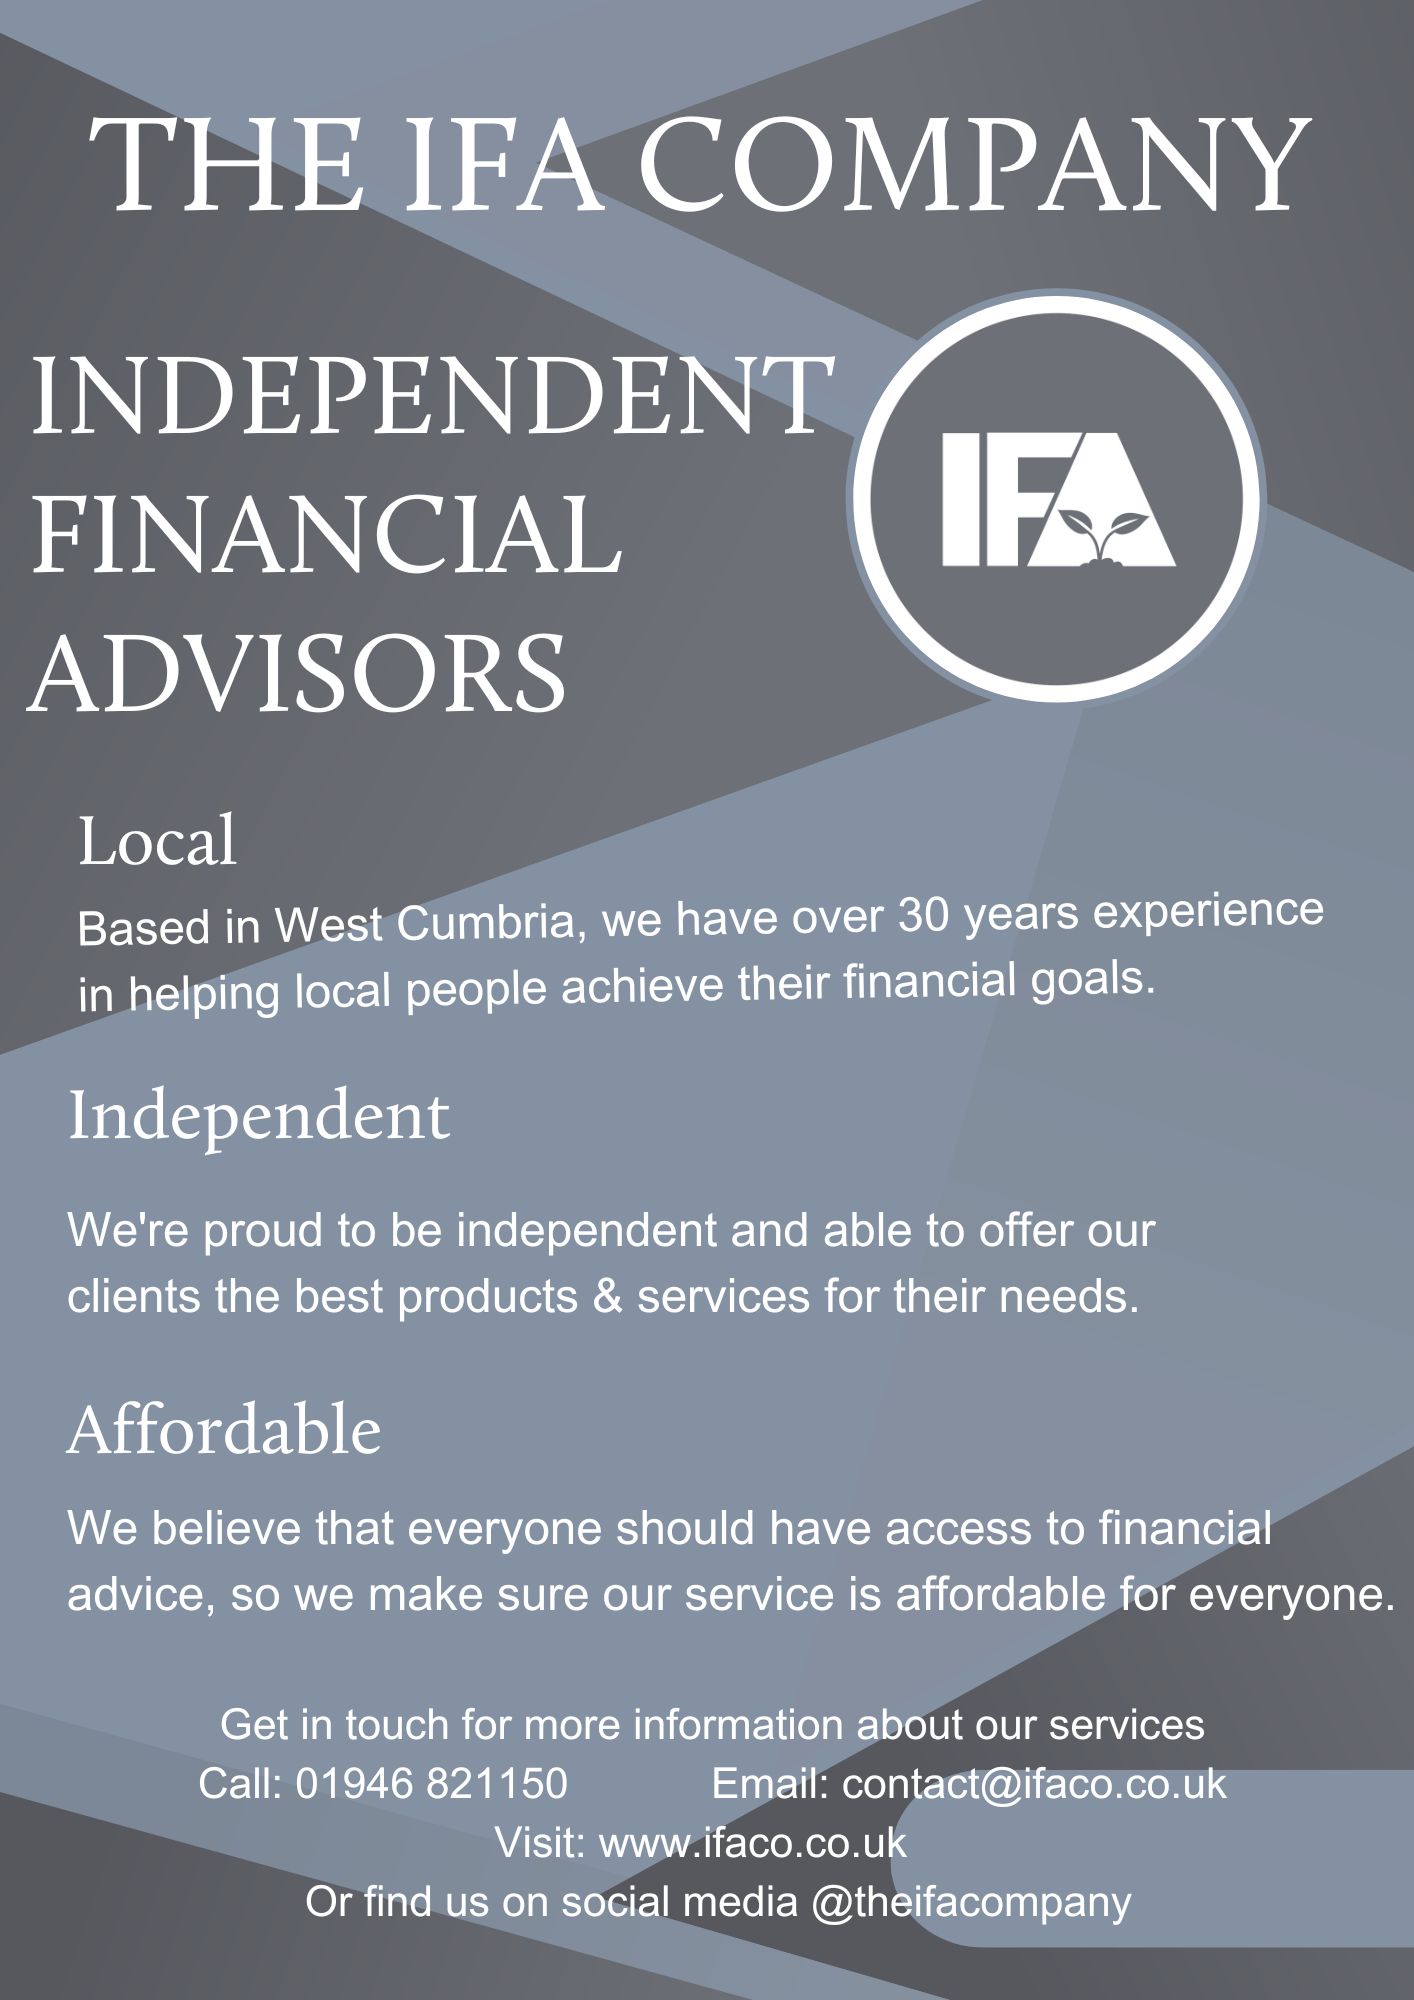 Financial Advice that’s Clear, Fair and Independent